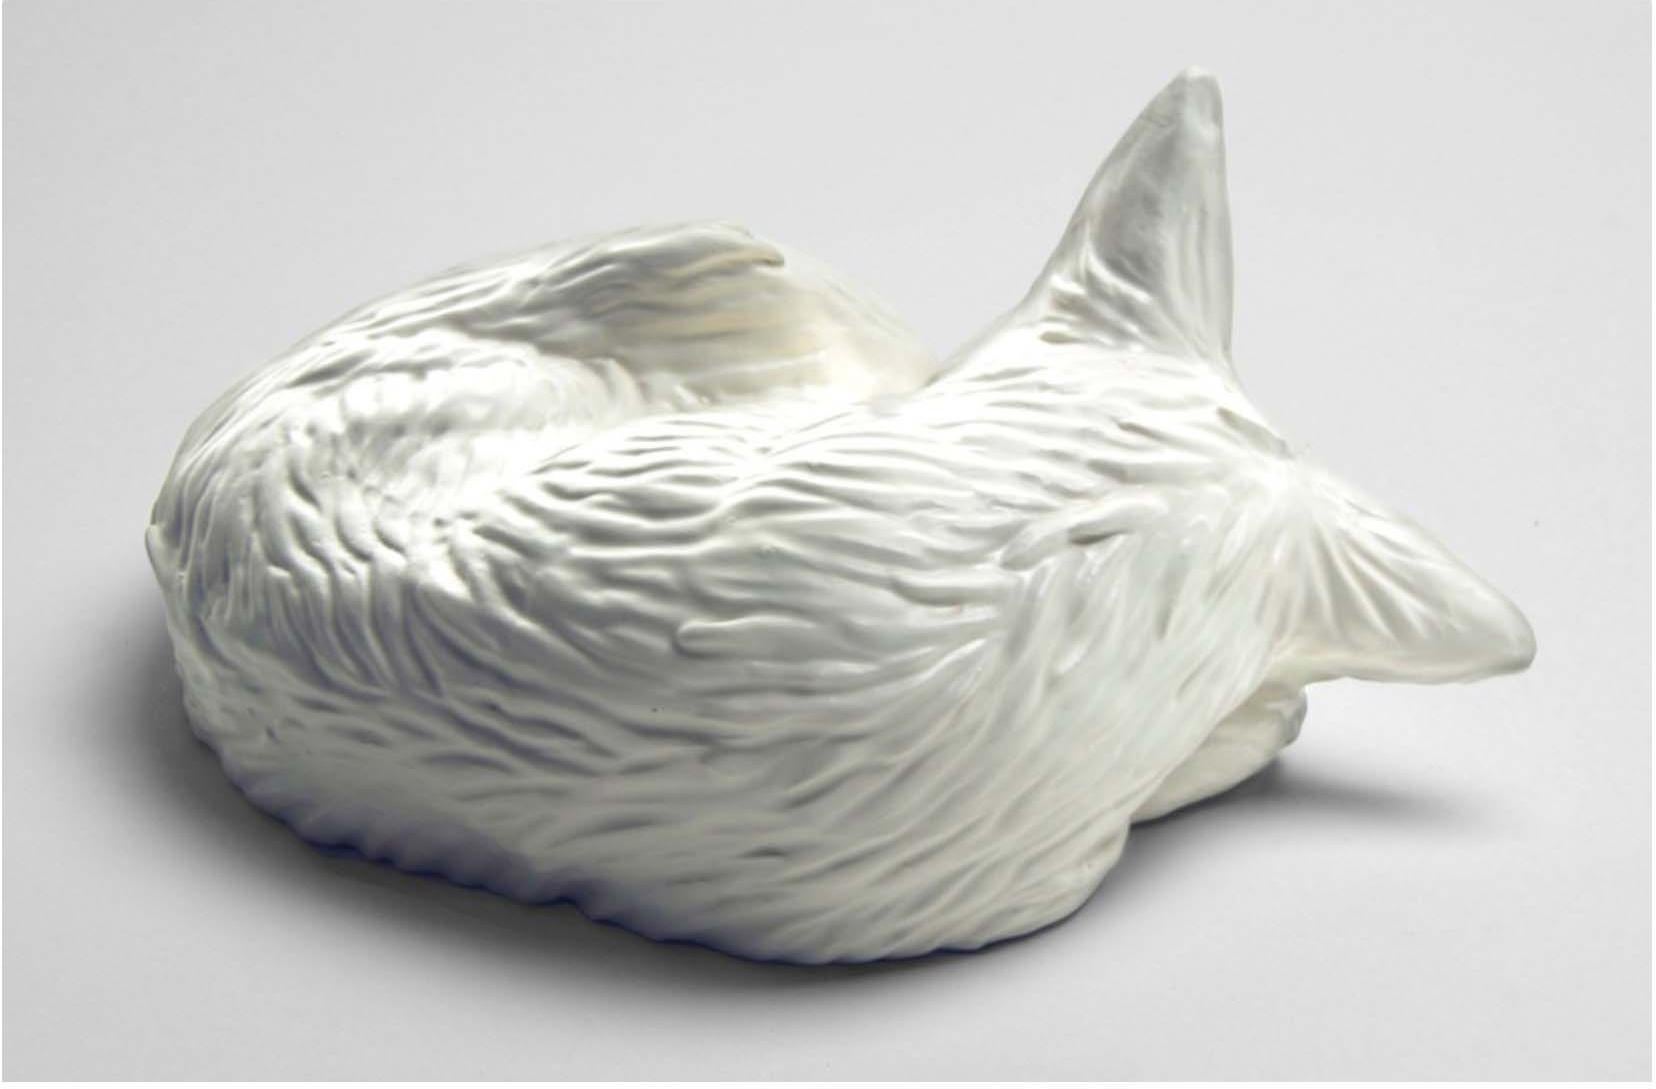 Bowl II: Dingo is made from slip-cast porcelain with a white satin glaze and 22K gold luster. It is part of the The Lost Camp's Black Apollo Island Series. 

This two-sided statement piece is sculpture of a sleeping dingo on one side, but when